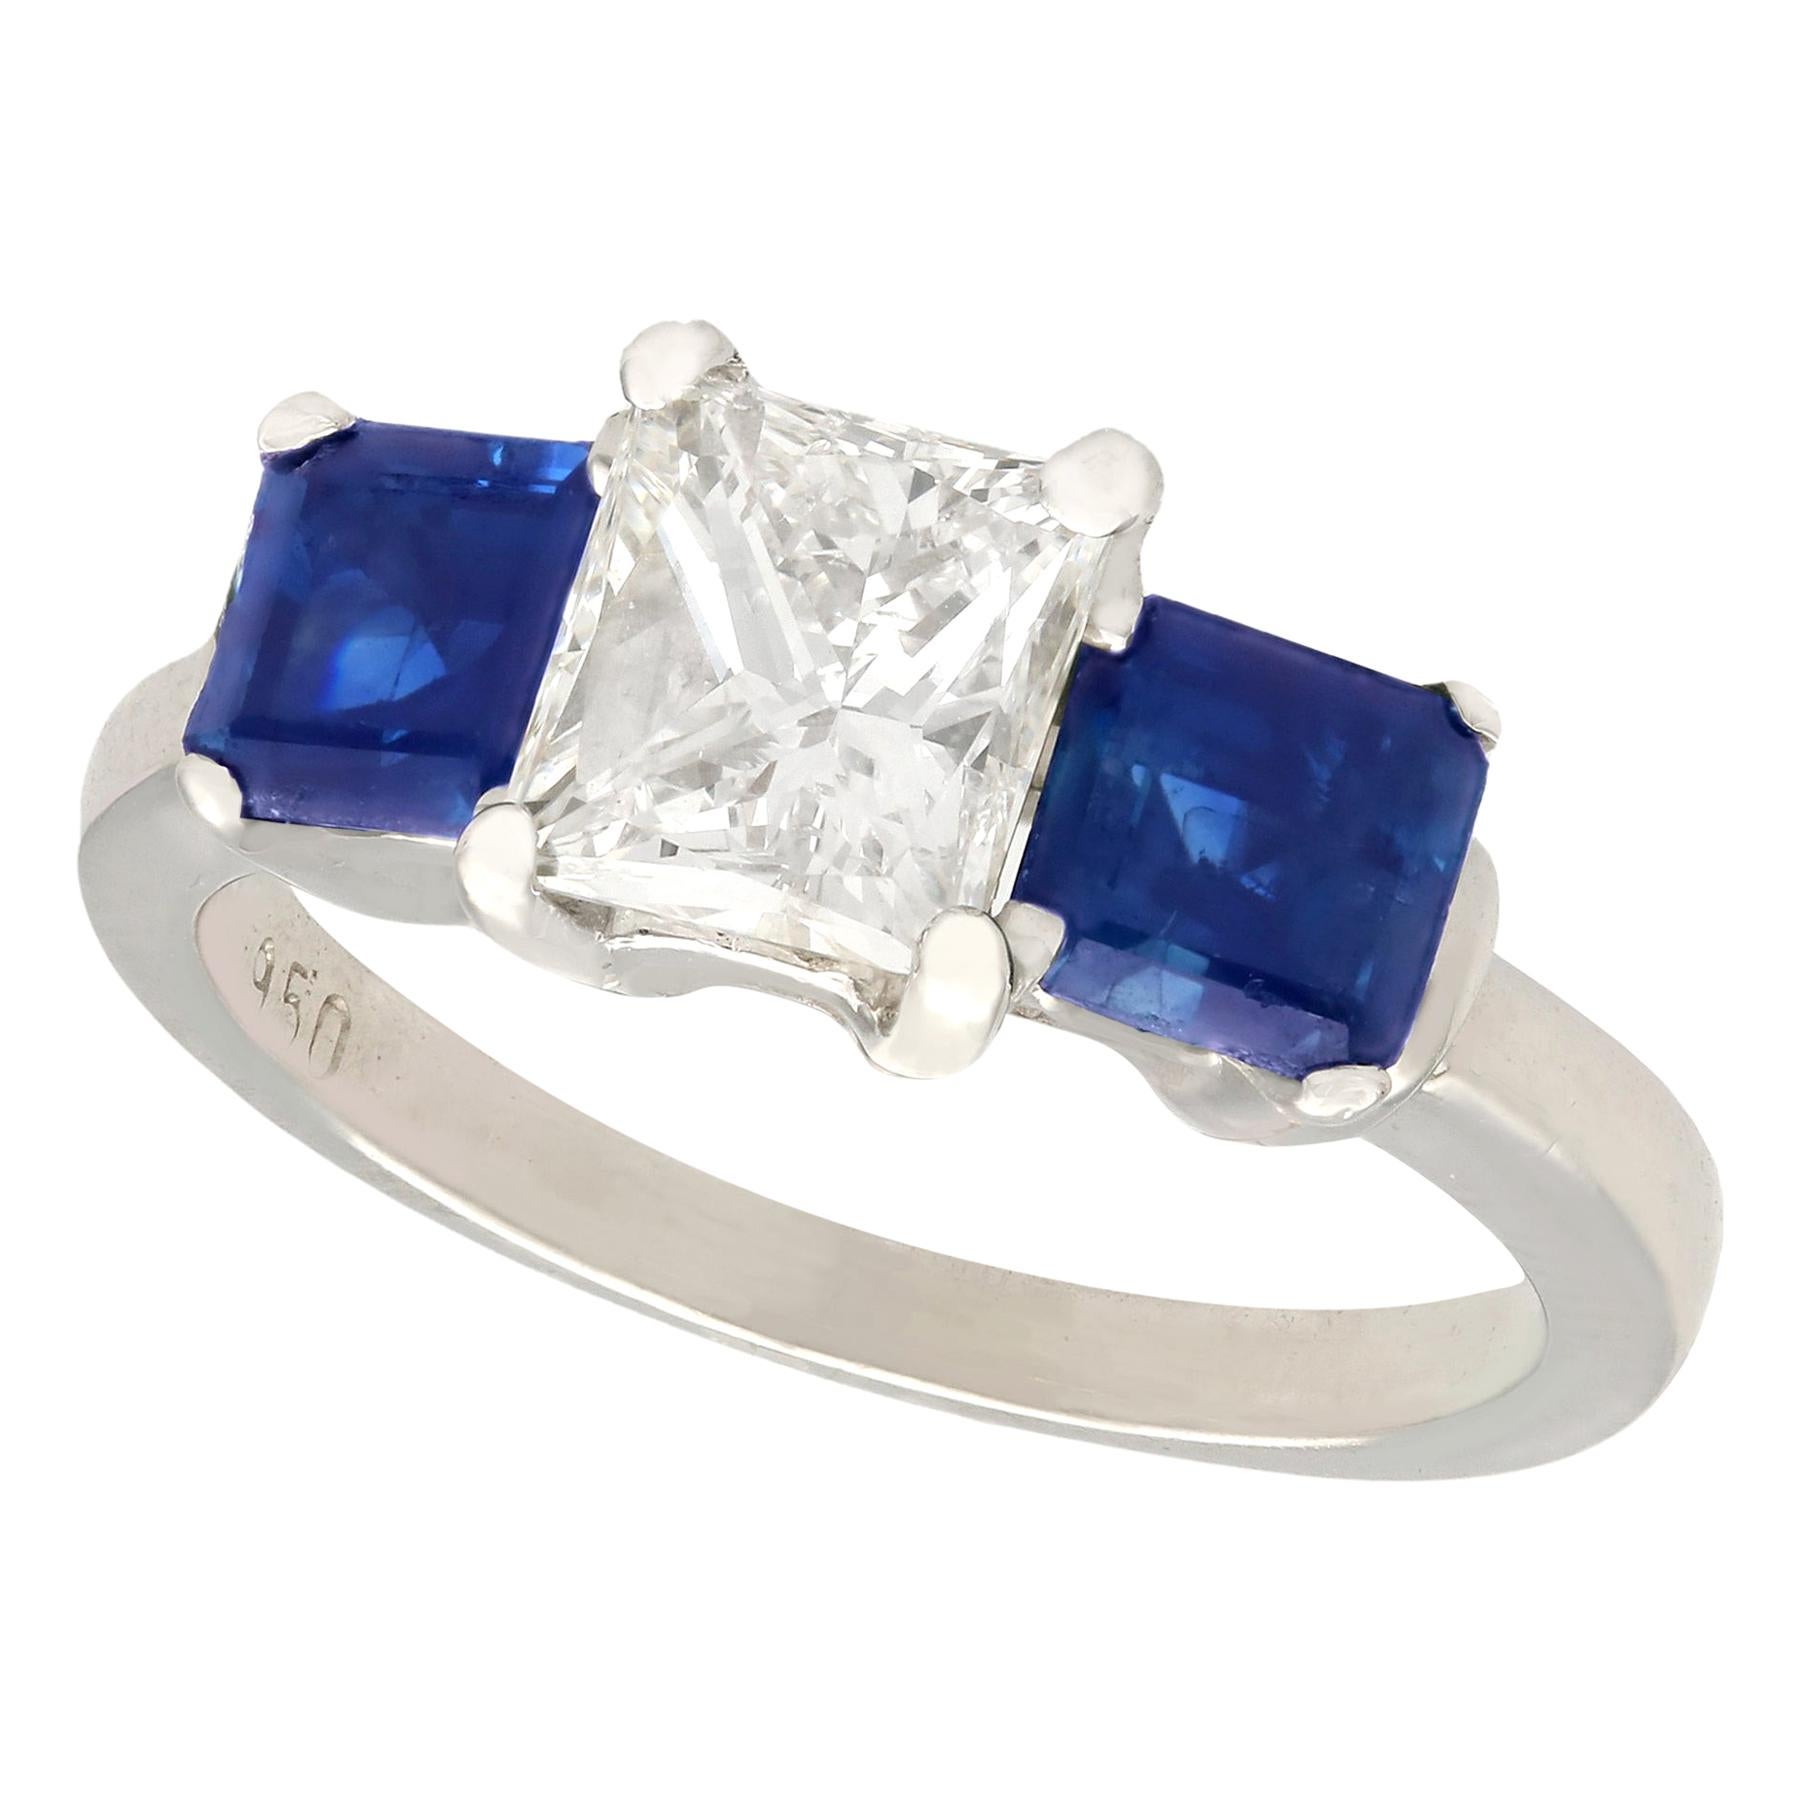 A stunning, fine and impressive 1.11 carat diamond and 0.83 carat blue sapphire, platinum trilogy / cocktail ring; part of our diverse jewelry and estate jewelry collections cocktail ring.

This stunning, fine and impressive sapphire and diamond